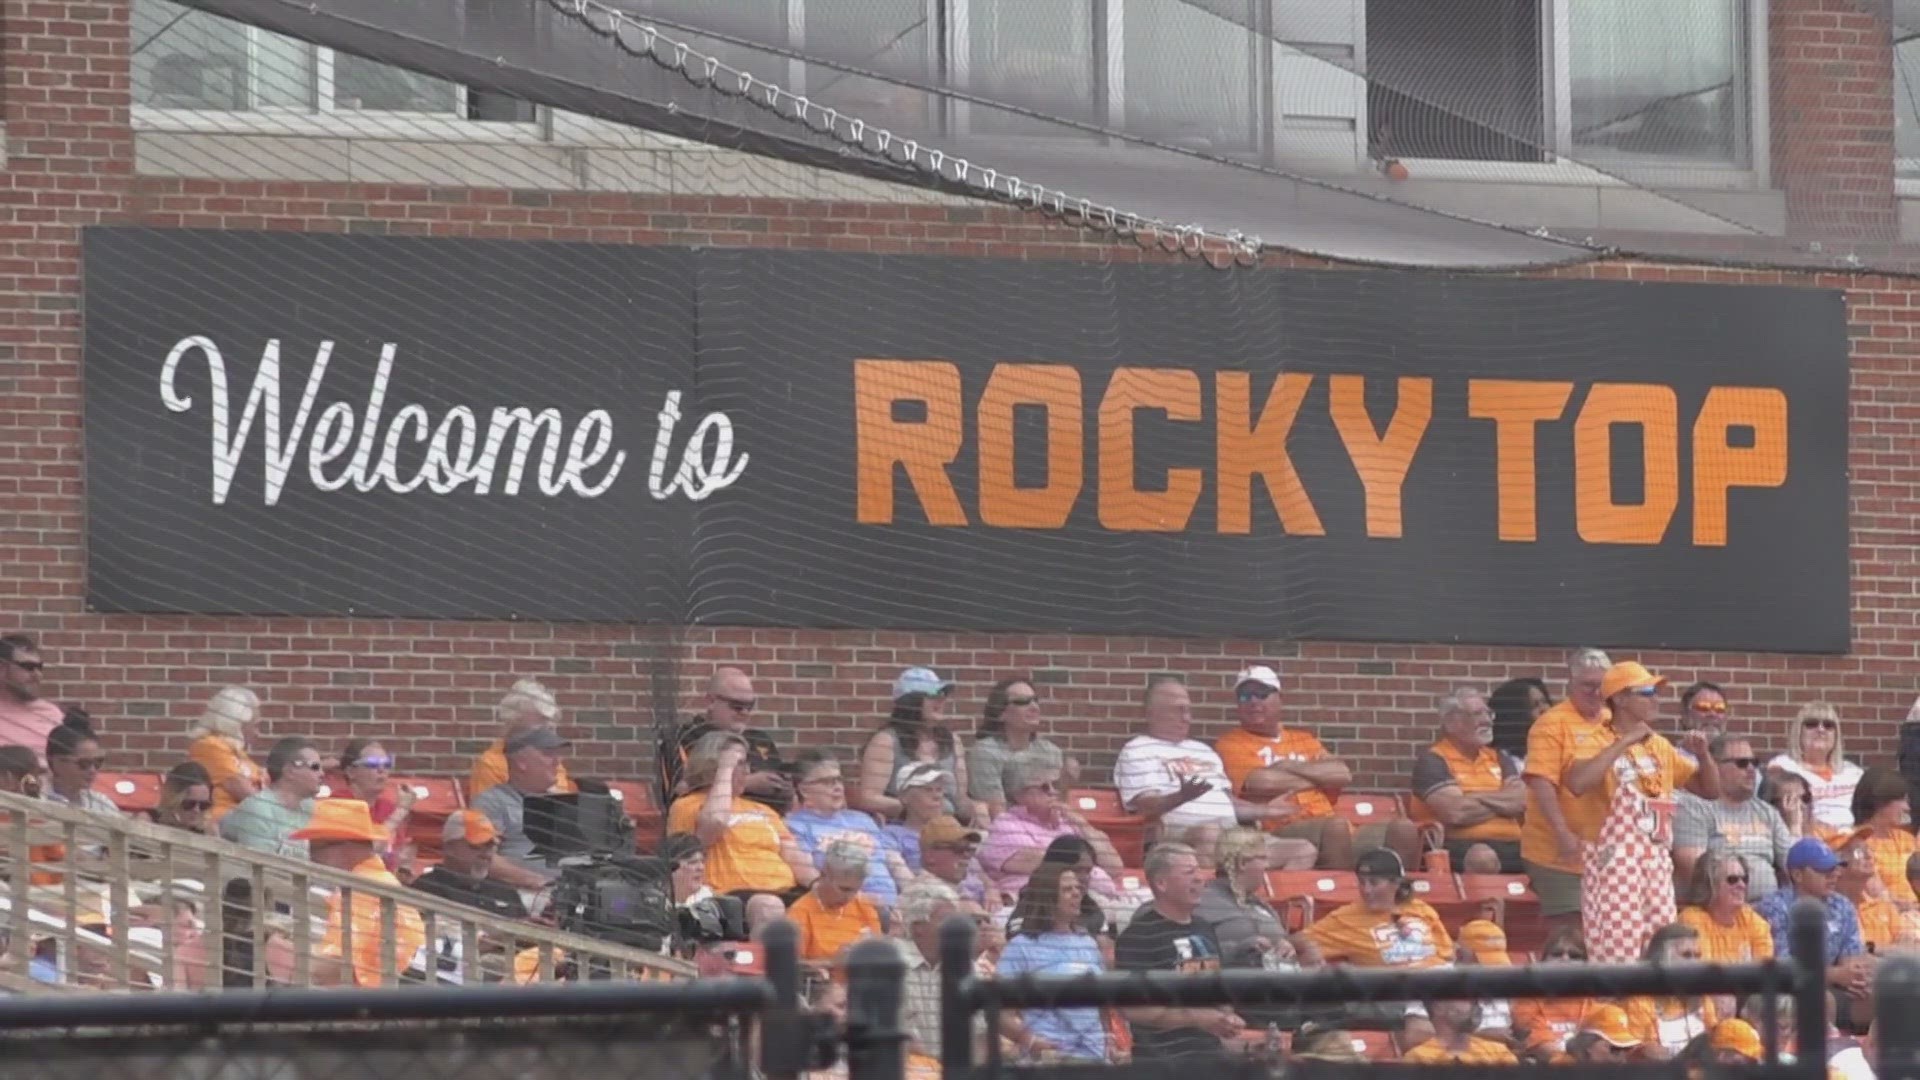 The No. 4 Lady Vols won by way of mercy rule, 12-0, against Northern Kentucky University Friday evening.